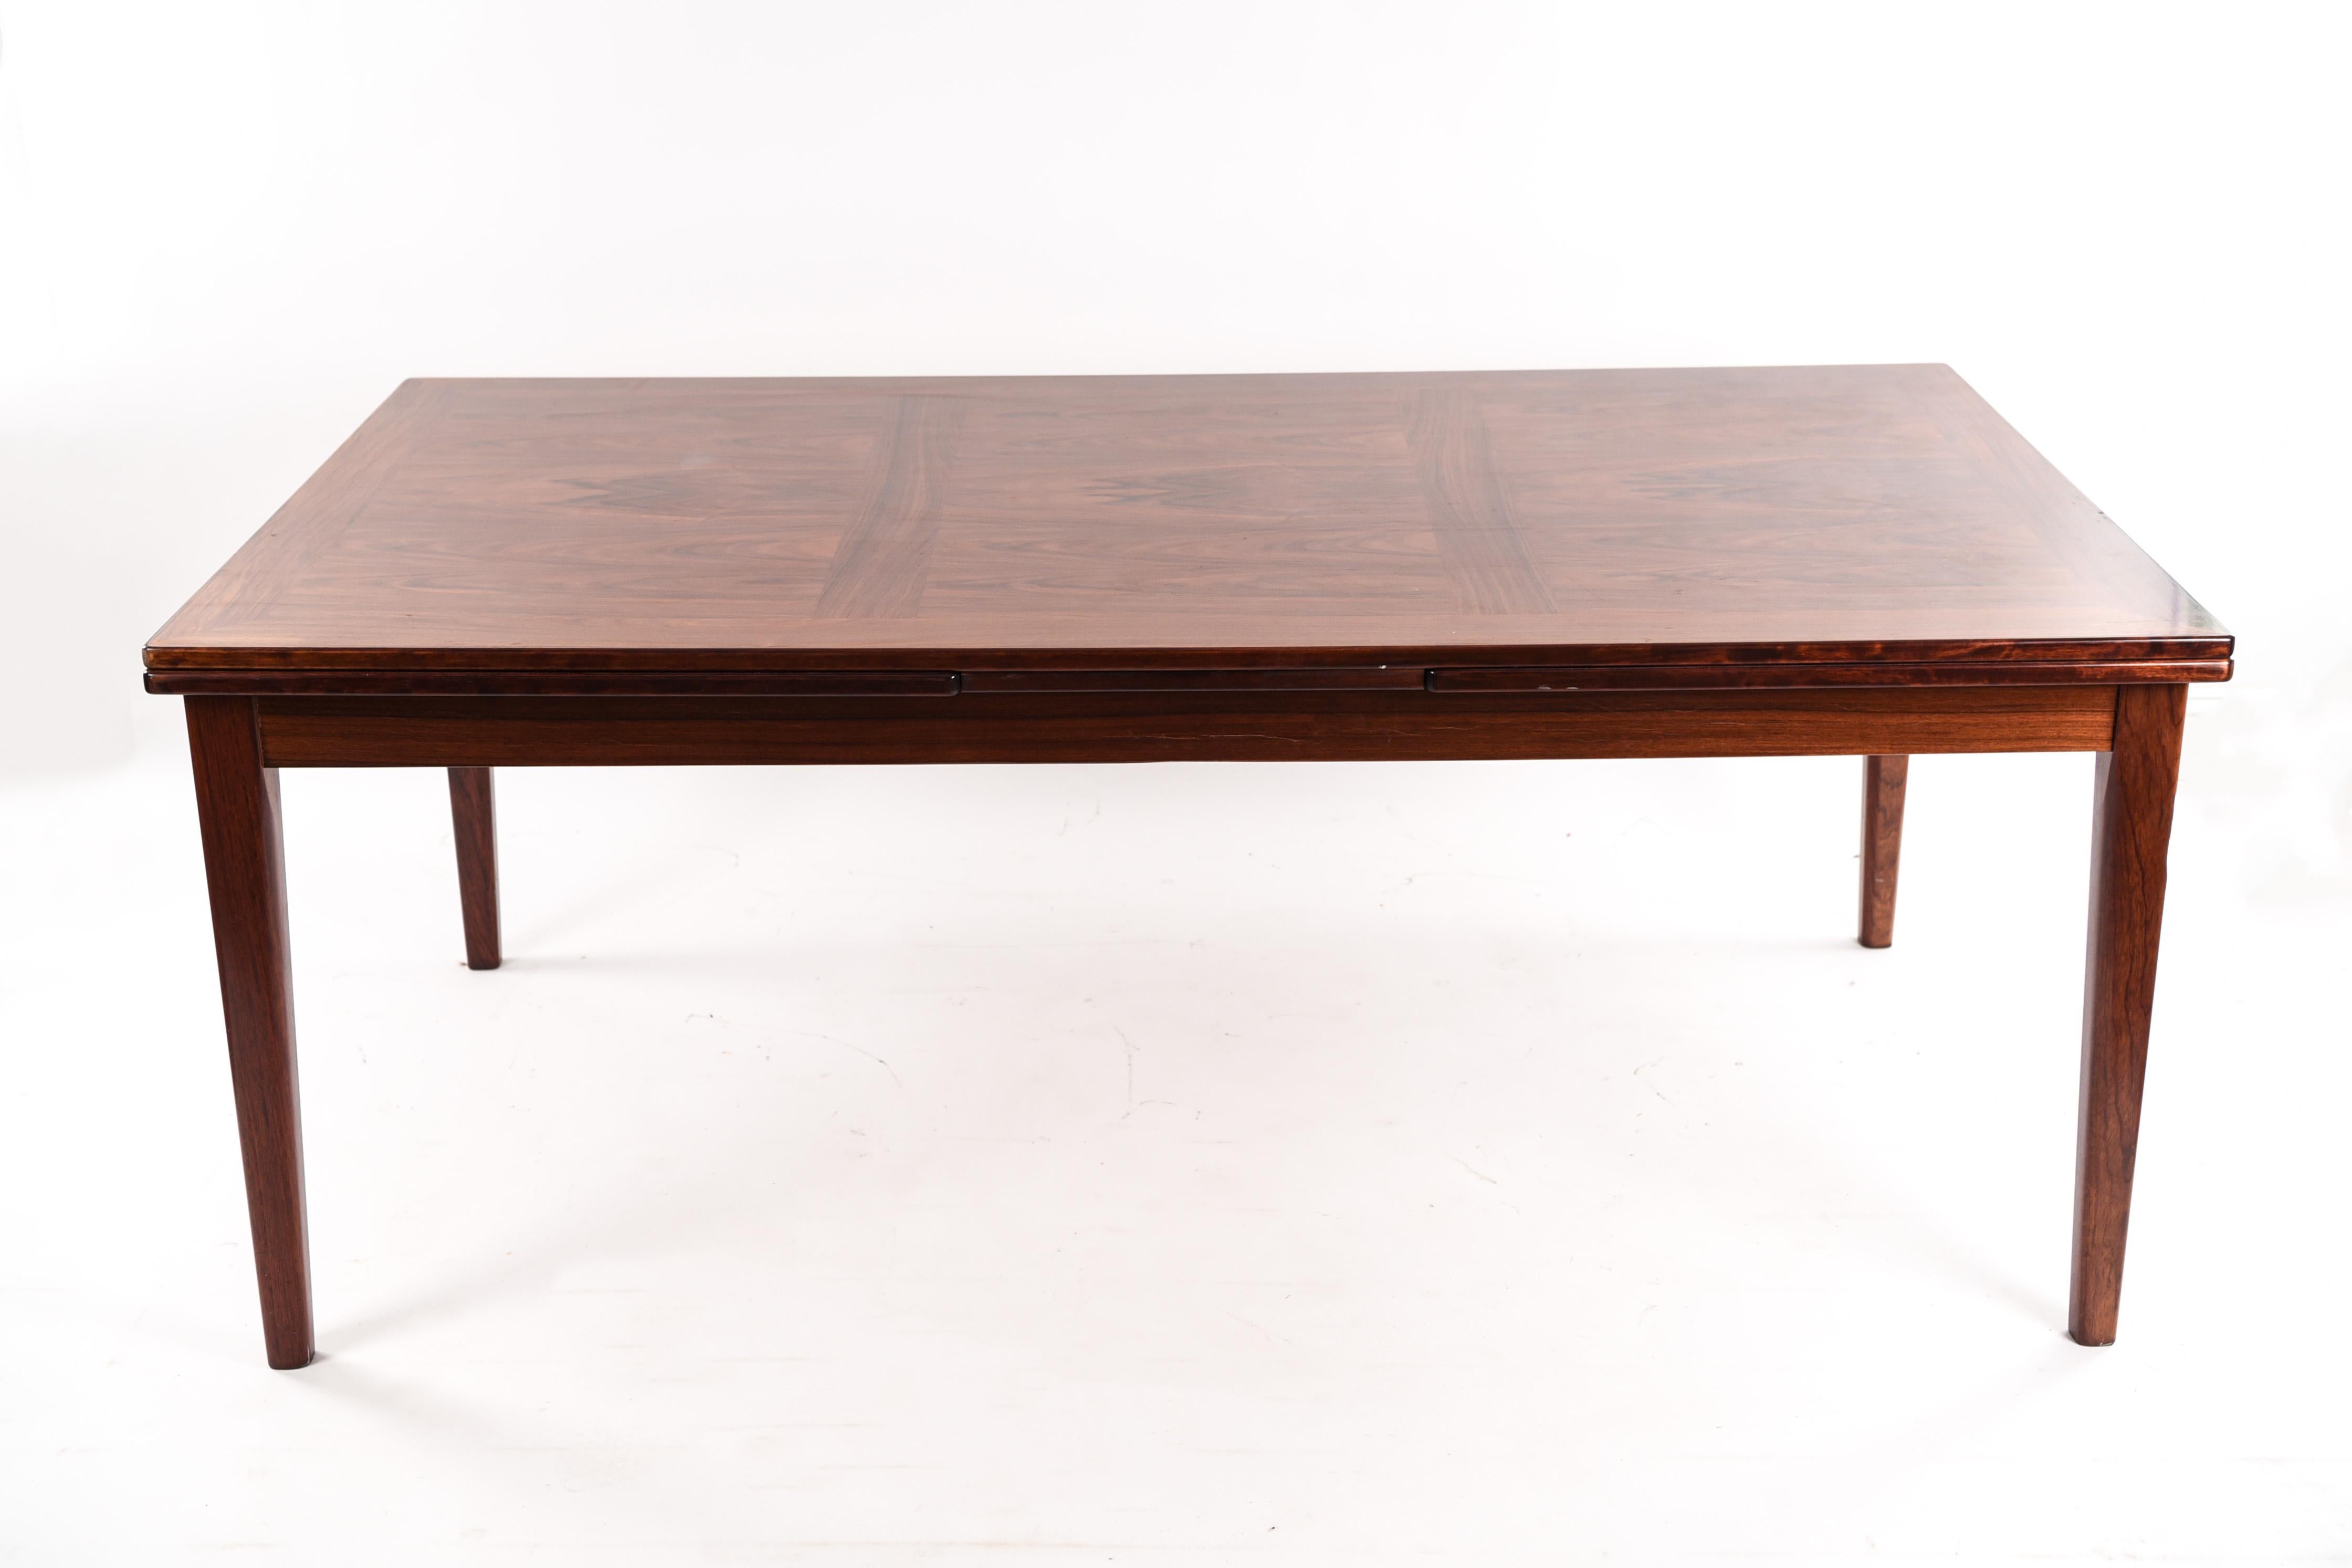 A beautiful modern extending dining table, fit to accommodate many guests. A simple, clean form.